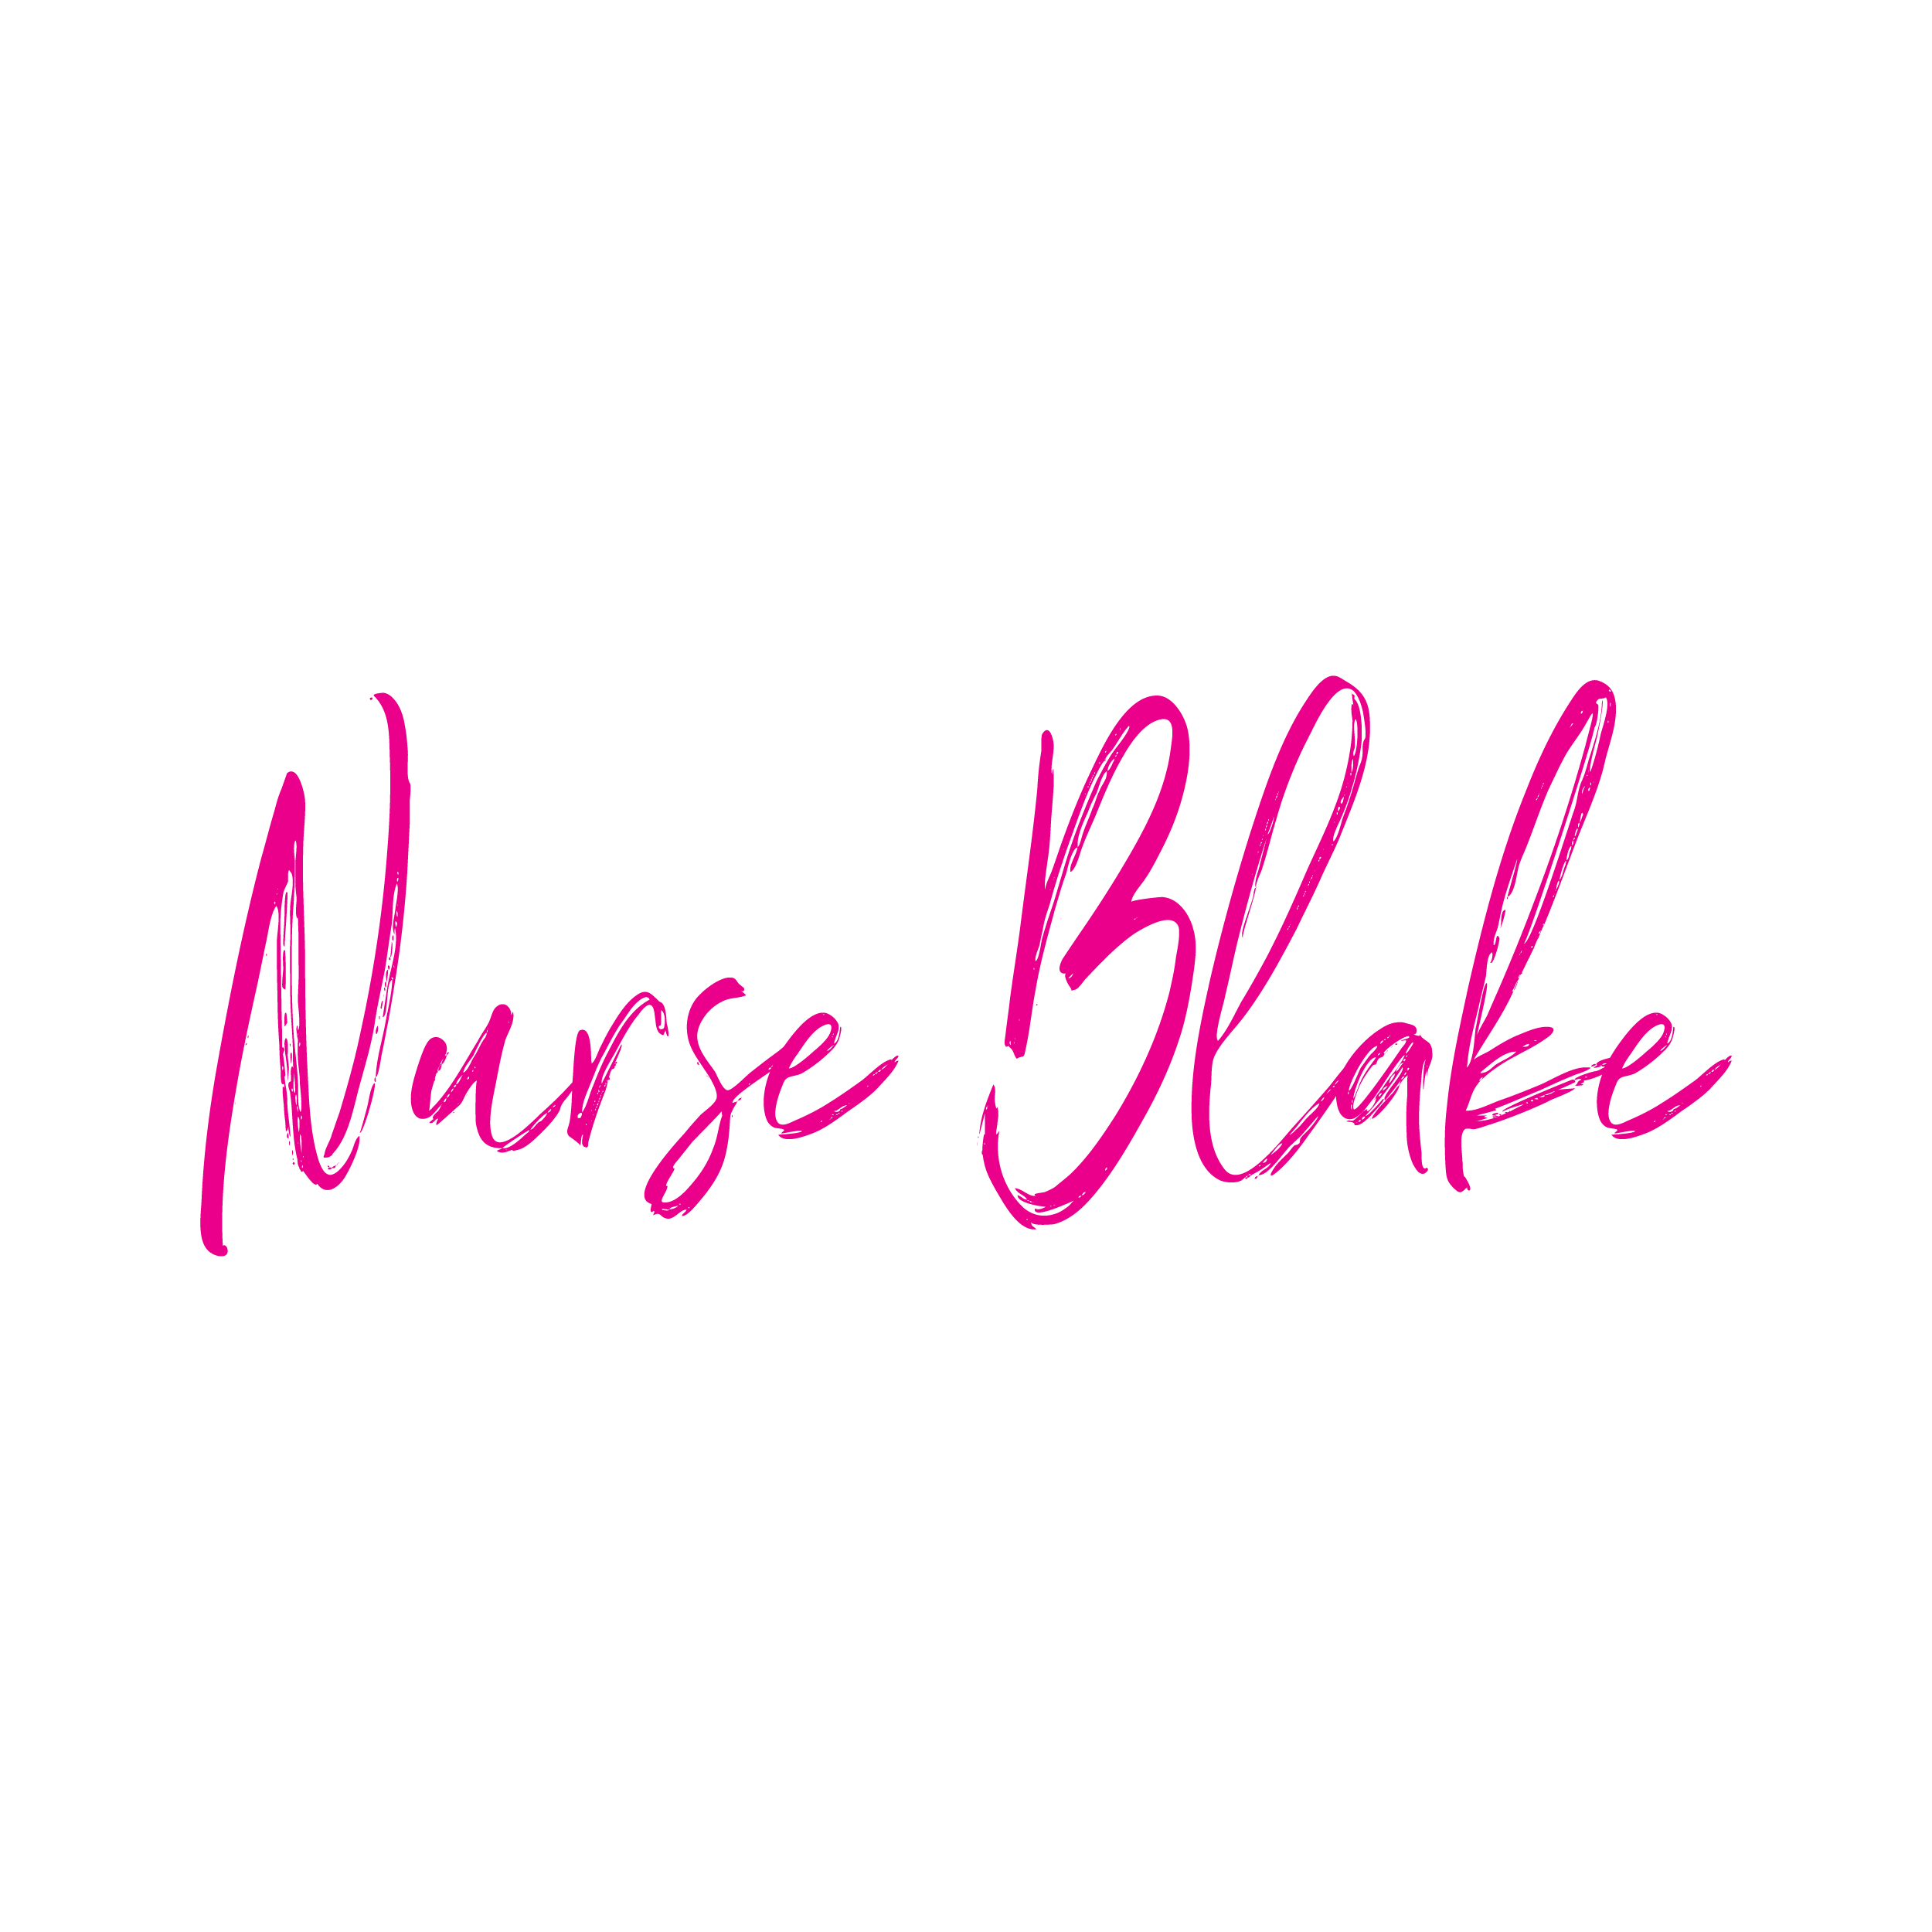 6/20/23 - Nurse Blake x Gales® Pro Line Shoe is Now Available